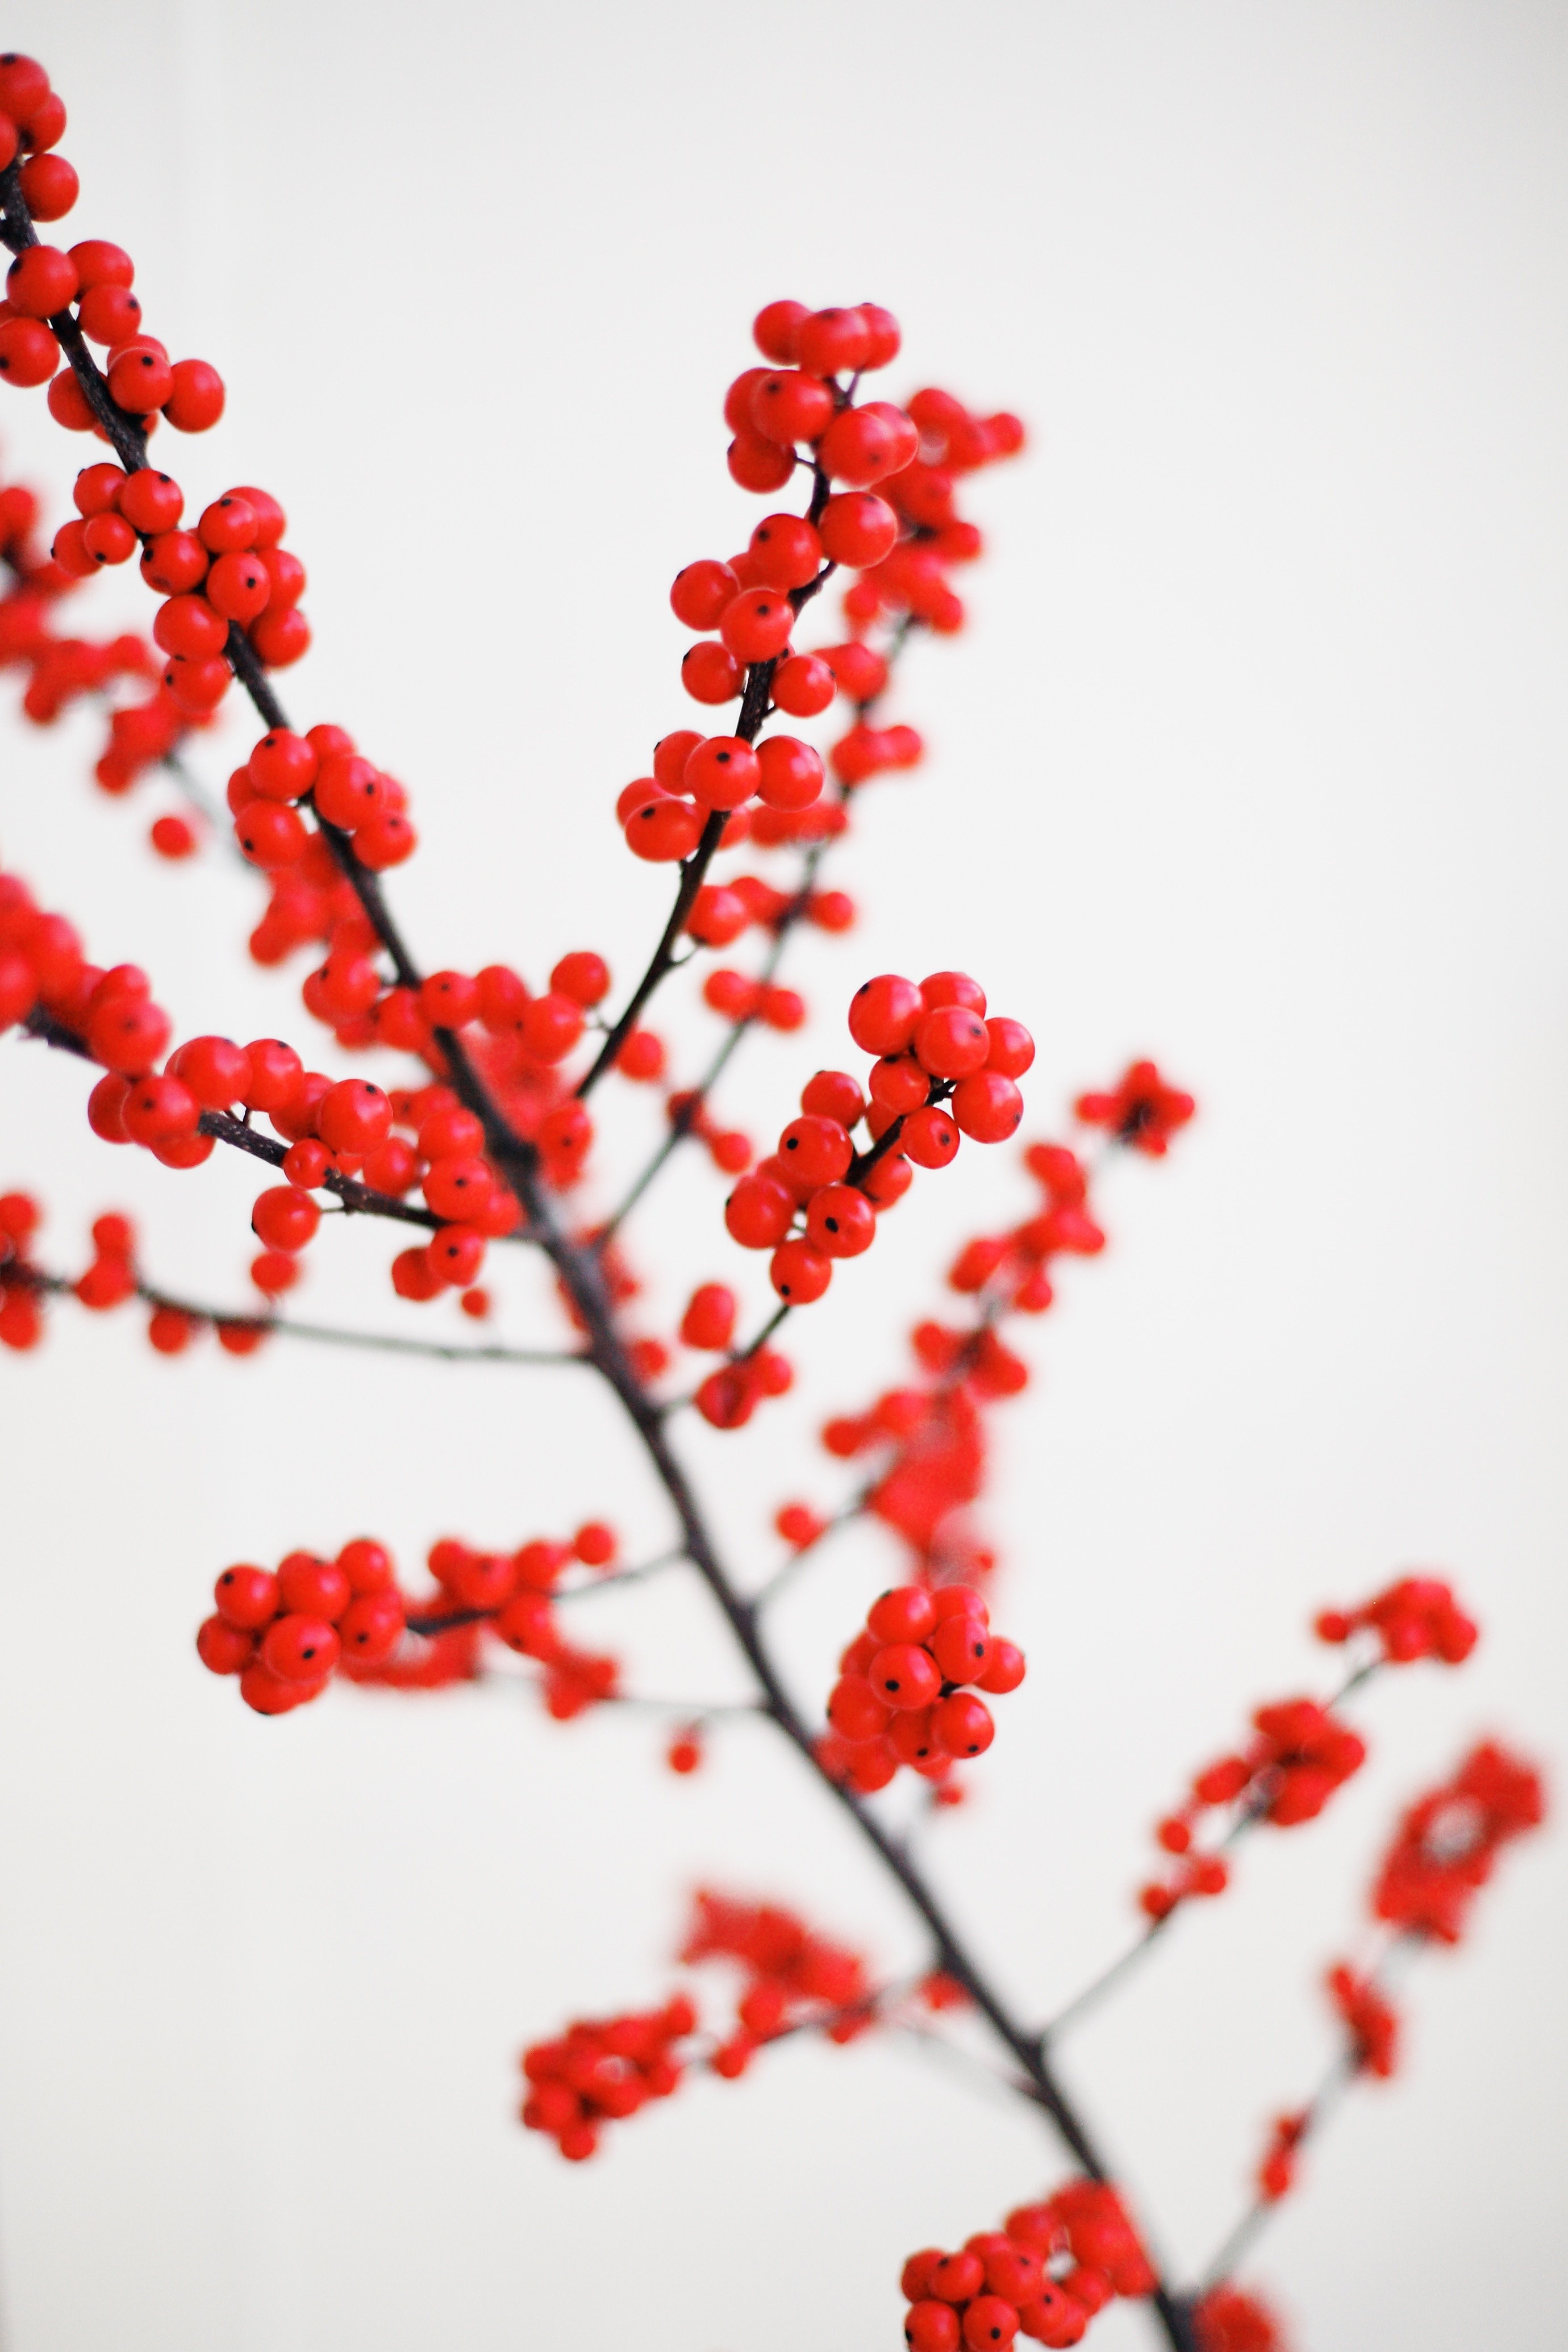 black tree branch with red round fruits